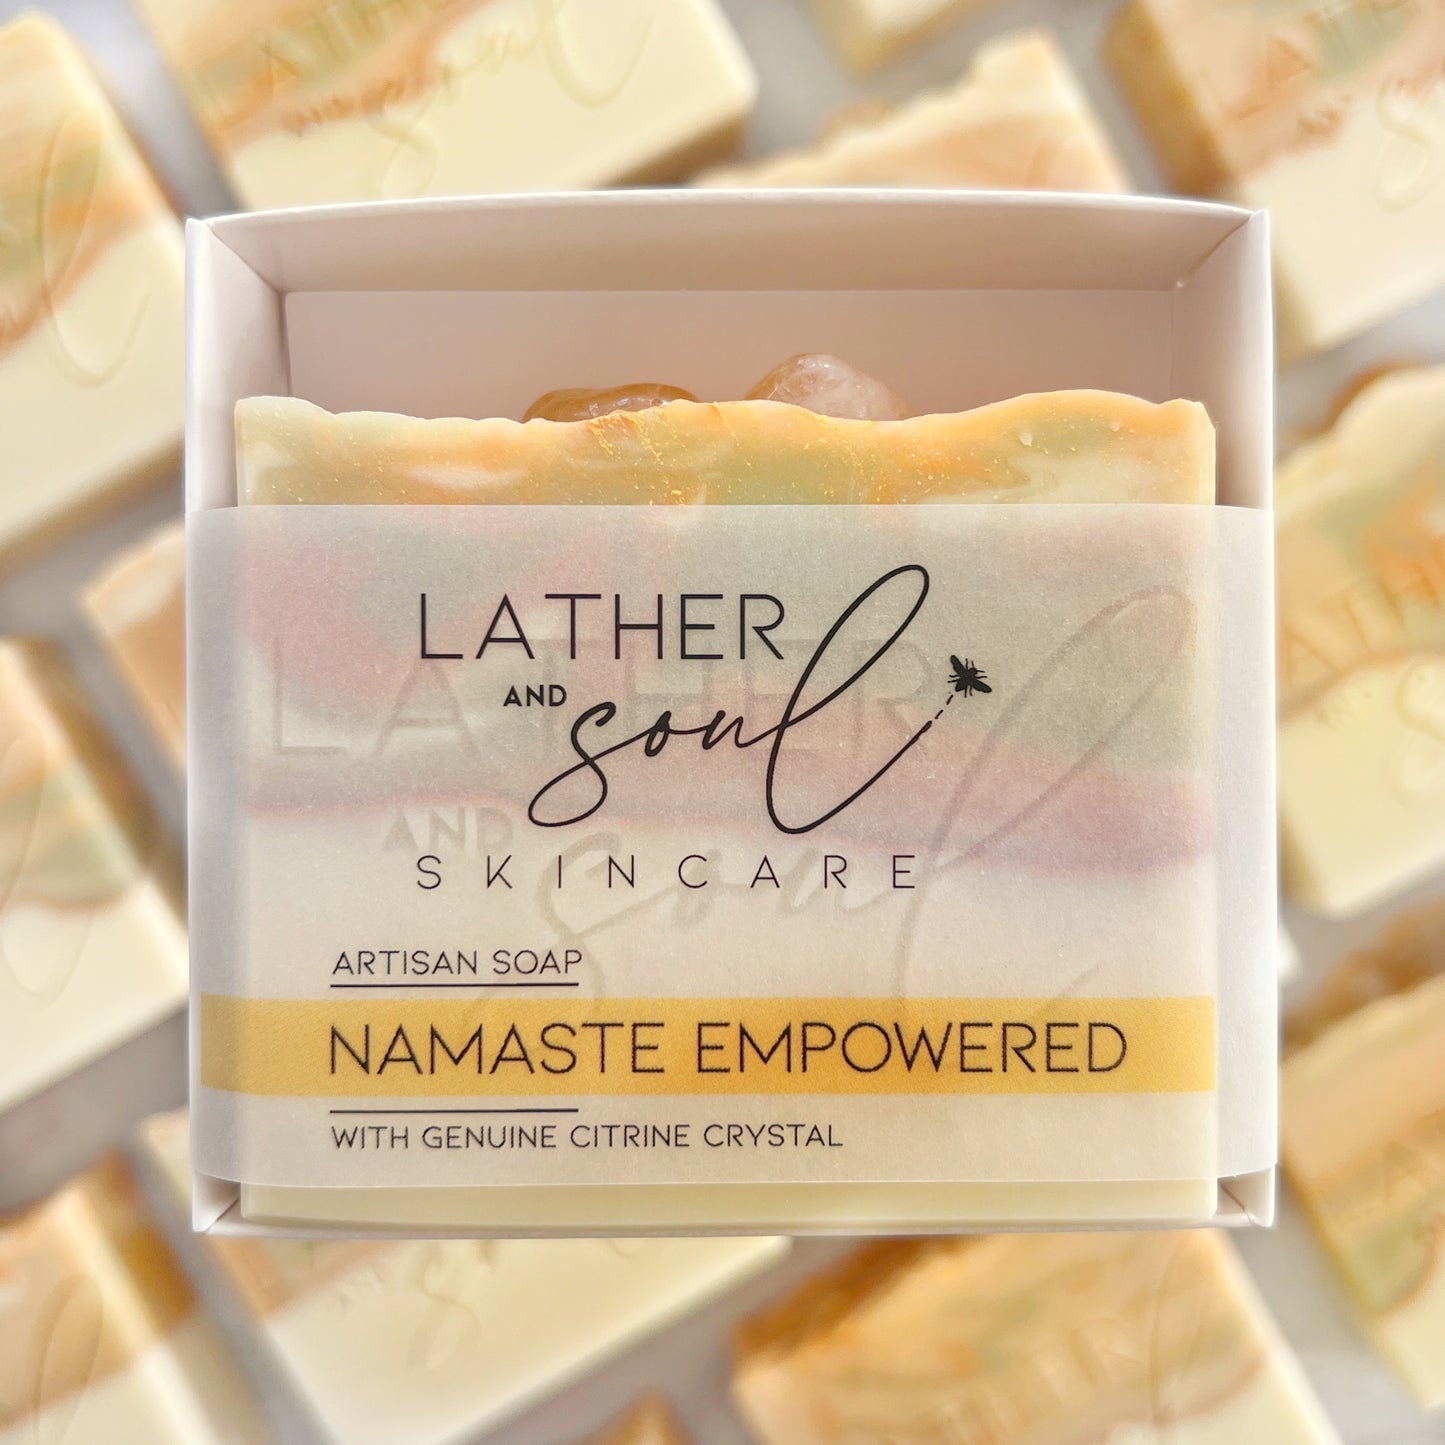 Namaste Empowered citrine crystal soap by Lather + Soul